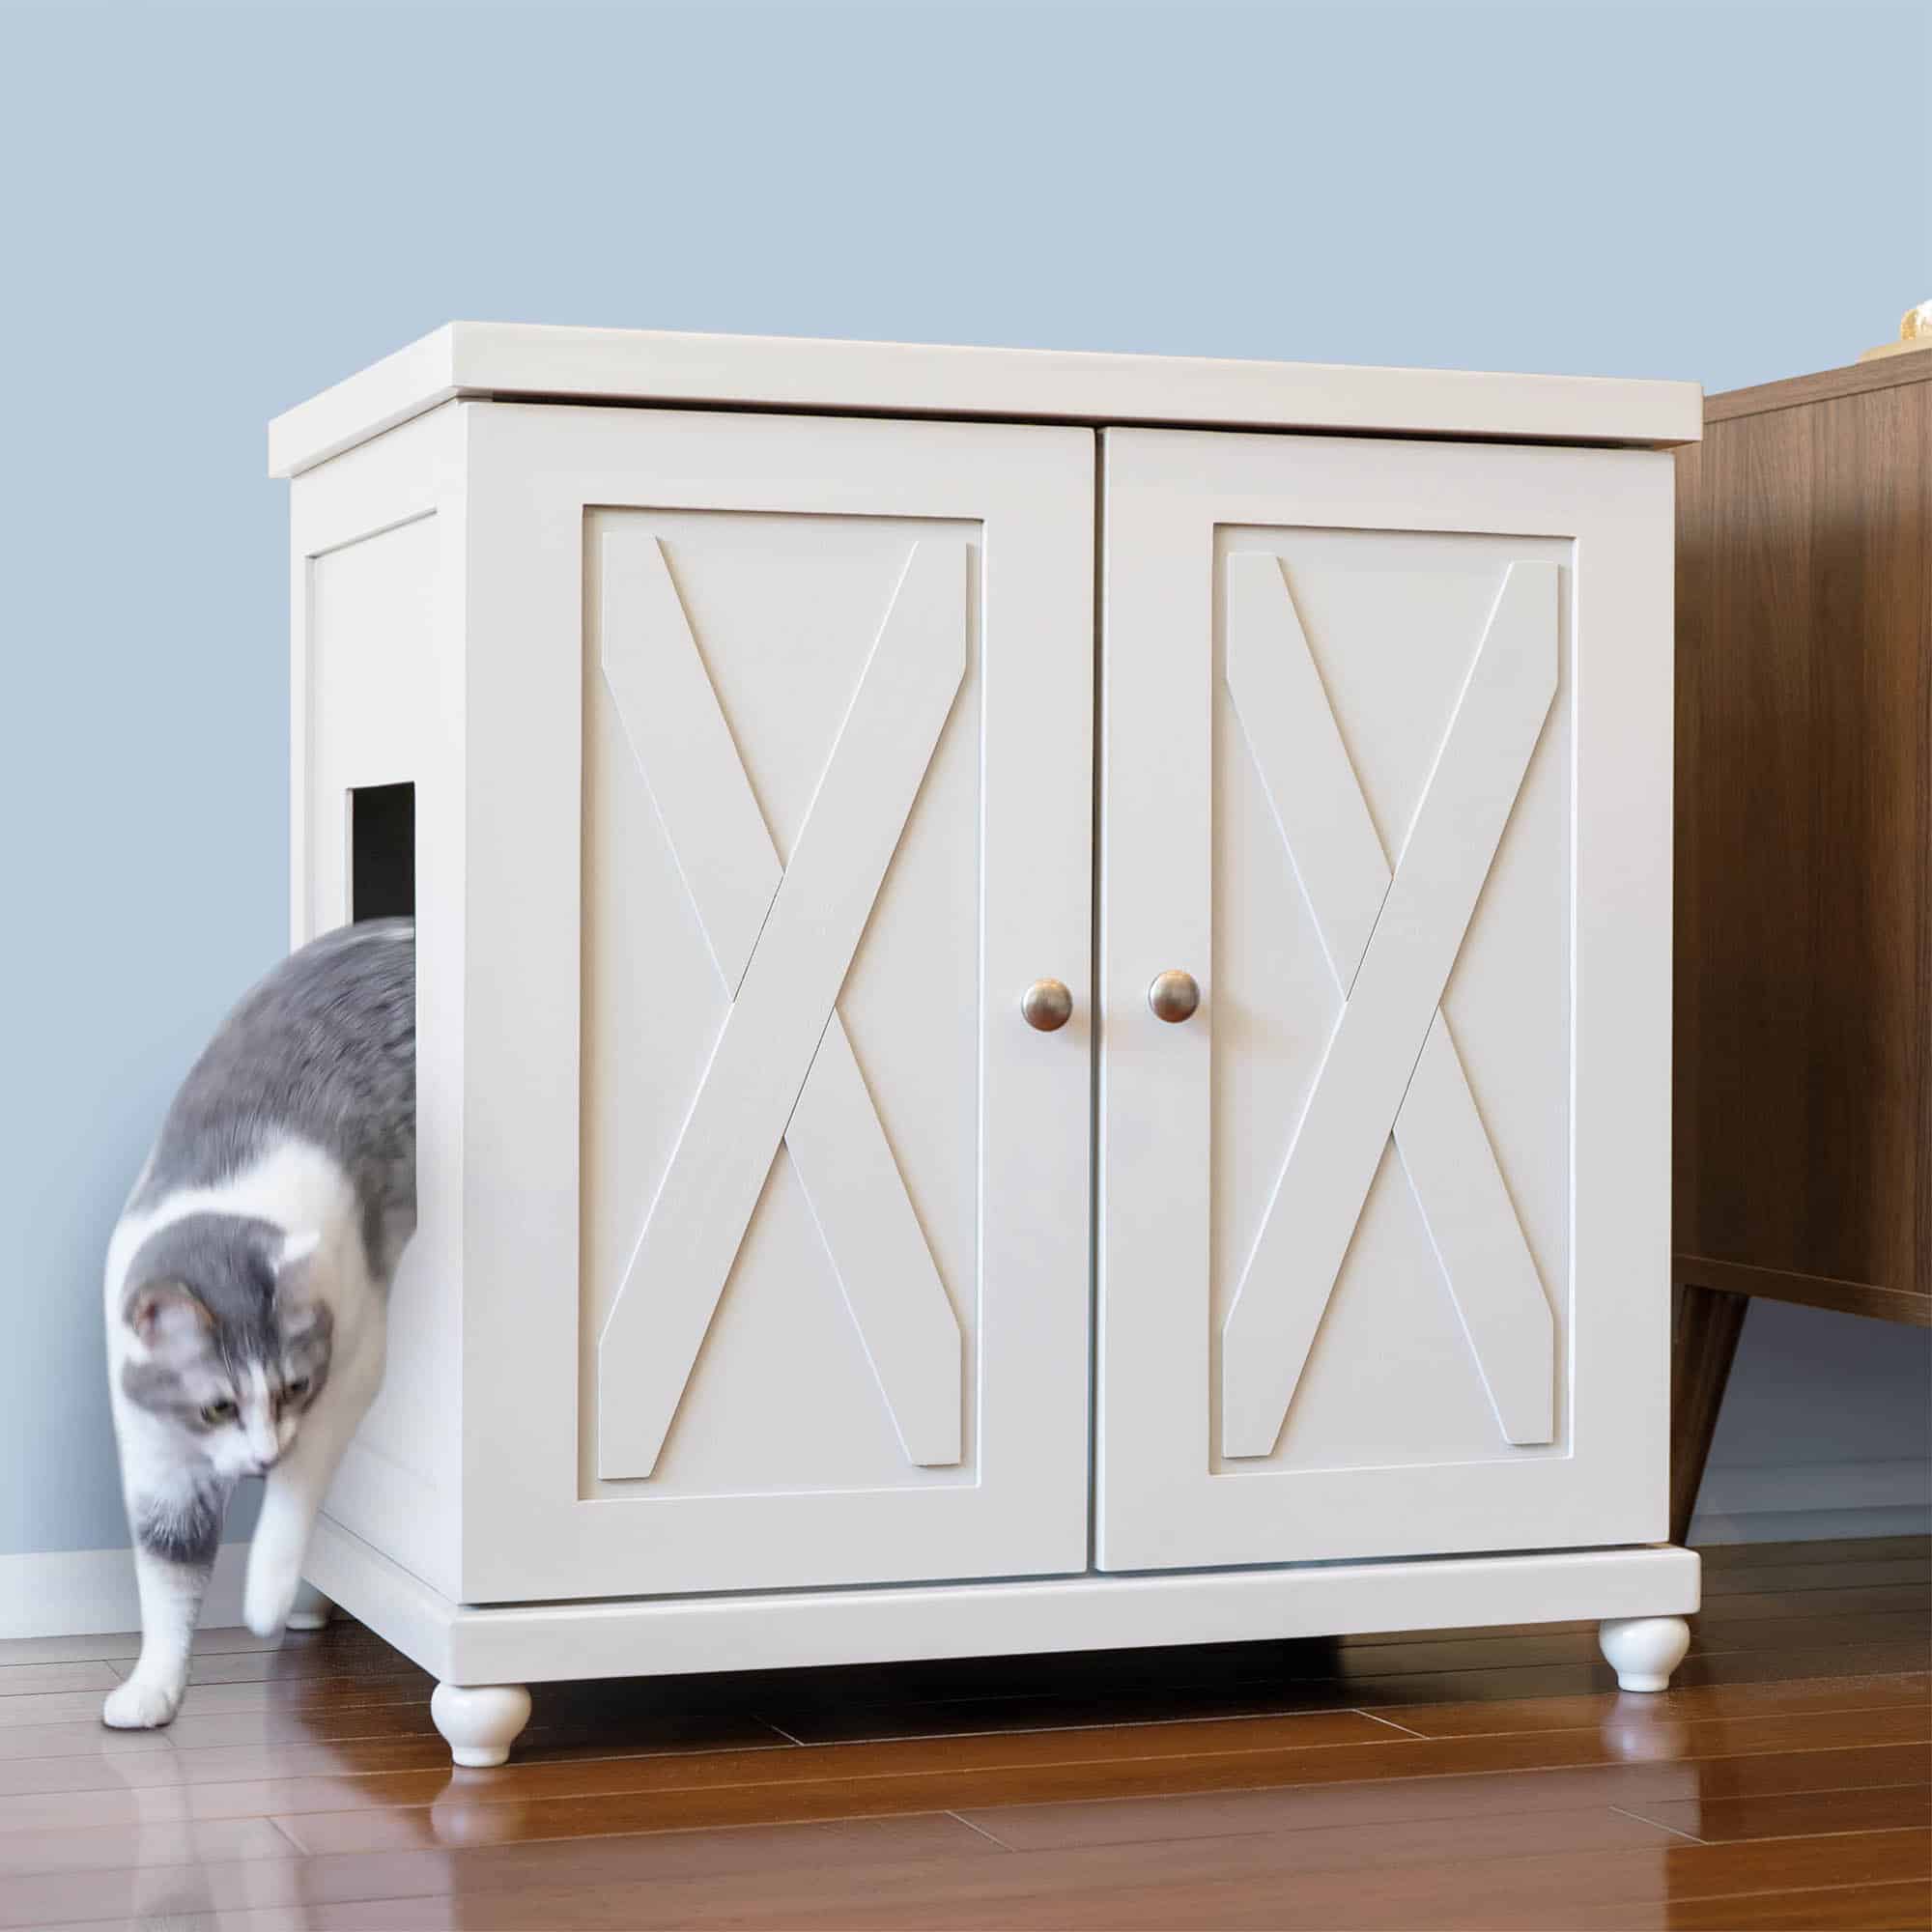 Large Mahogany Color XLarge Hidden Litter Tray Cat Furniture Cottage Style THE REFINED FELINE Cat Litter Box Enclosure Cabinet 